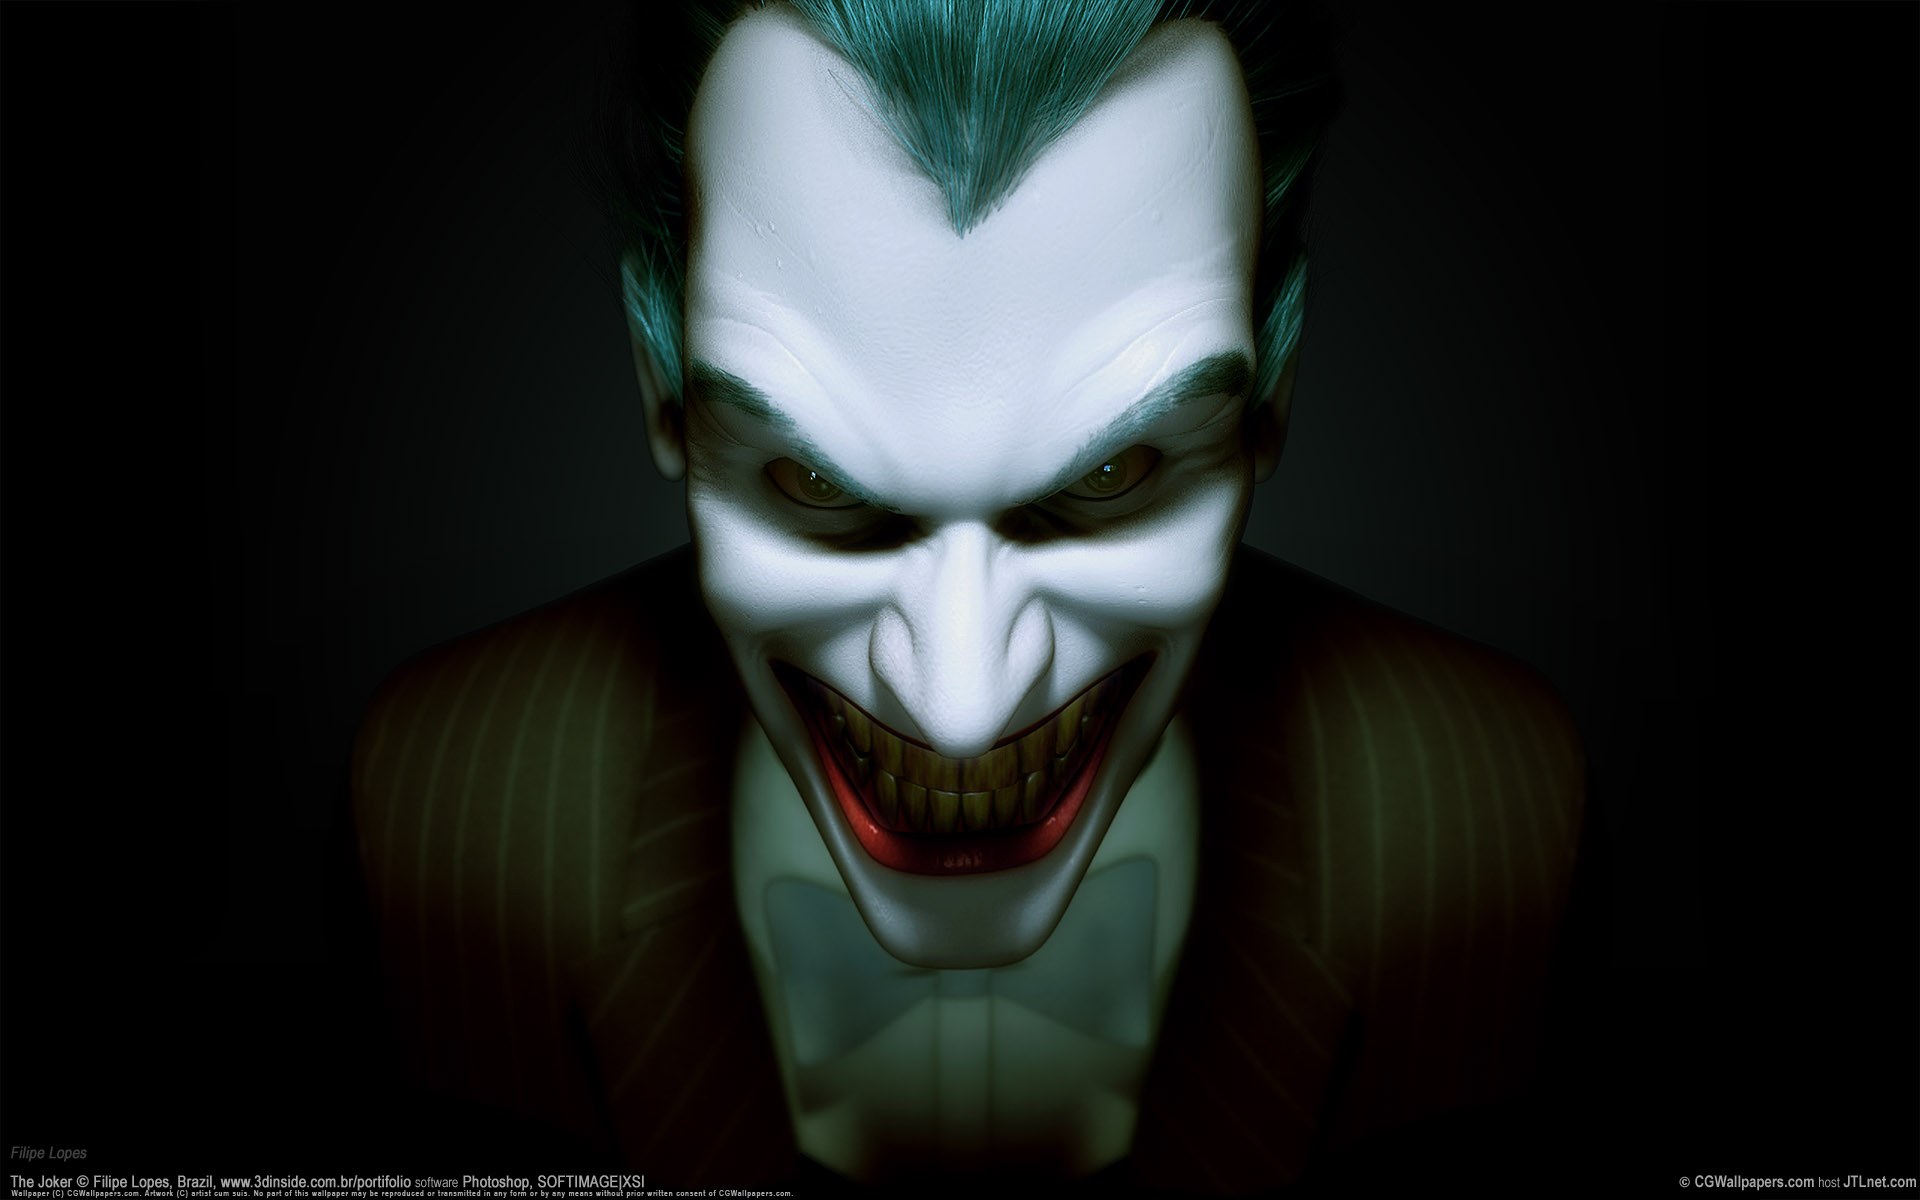 Evil Joker Face Characters Smile Hd Wallpapers For Mobile Phones And Laptops Wallpapers13 Com